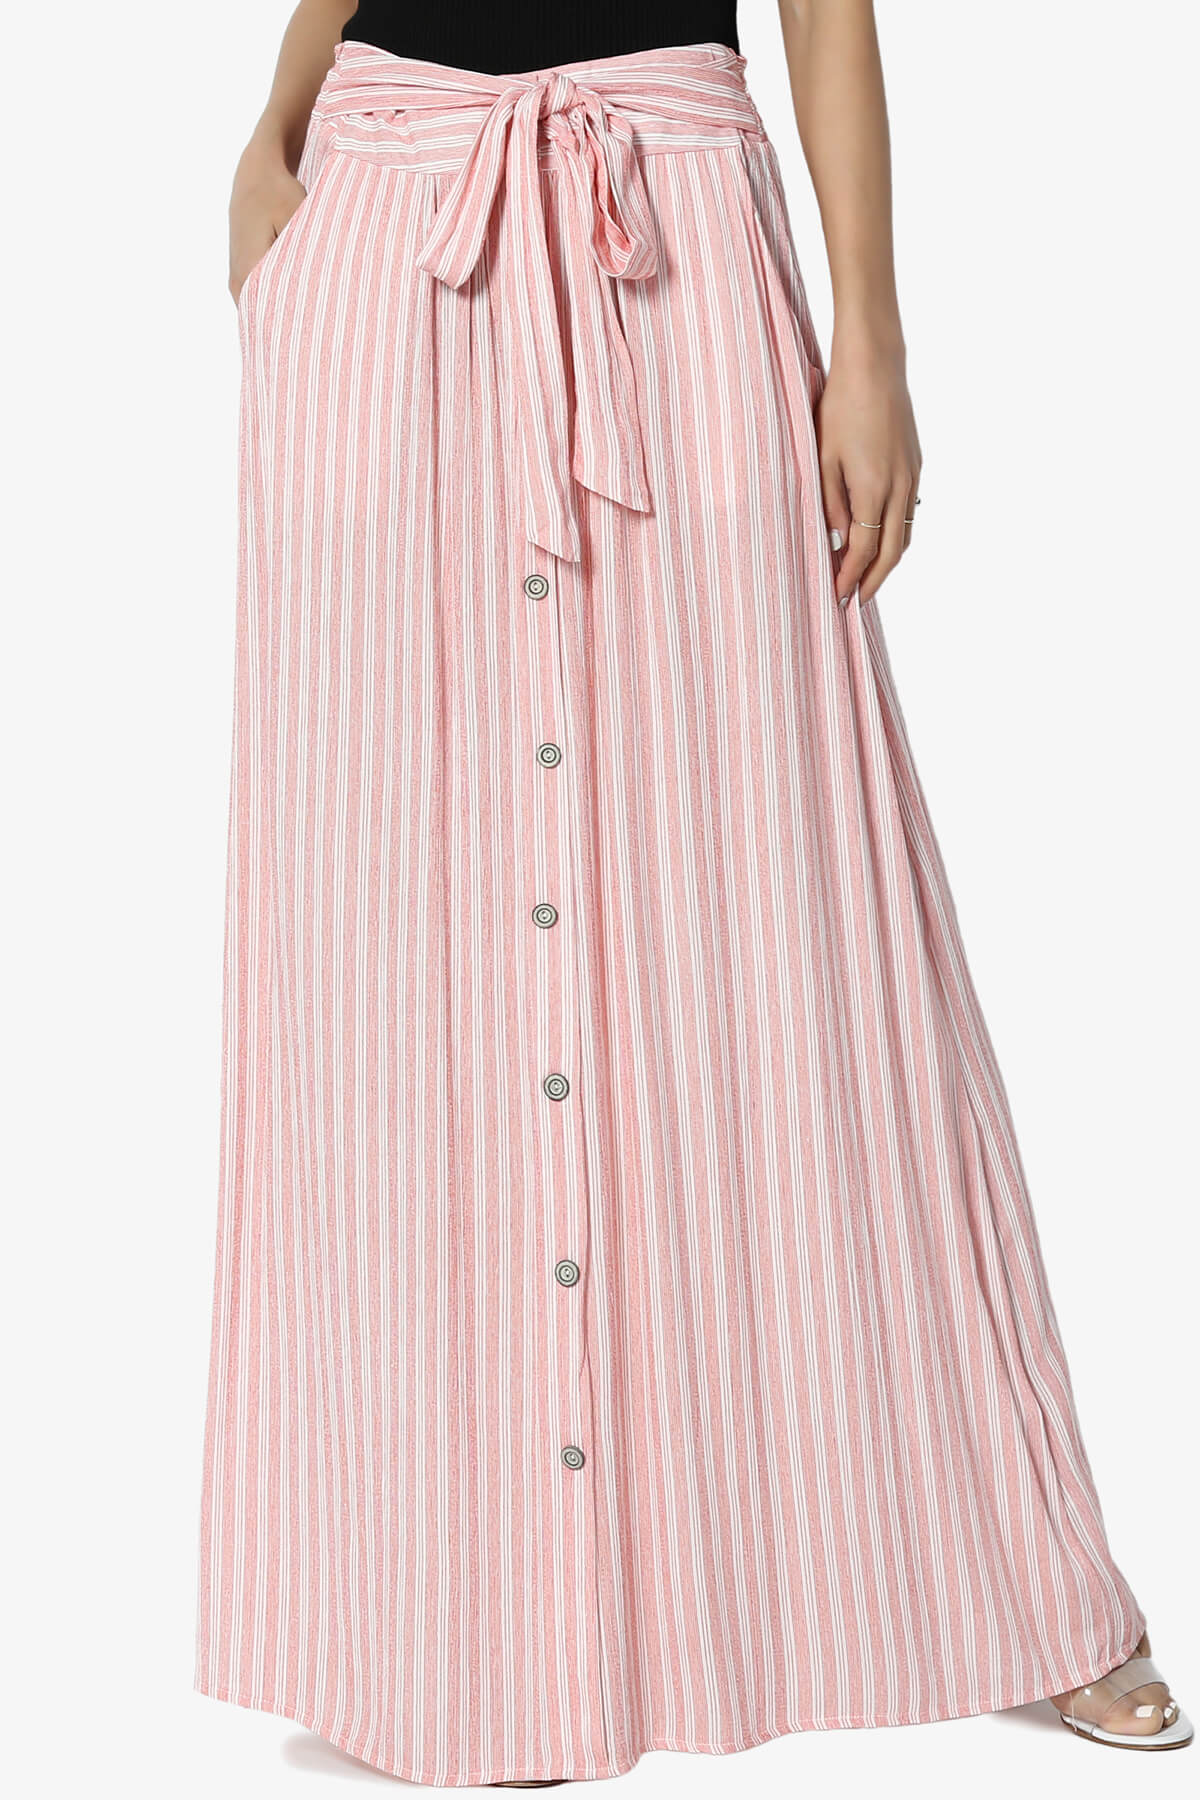 Silva Bow Striped Button Front Maxi Skirt RUST_1